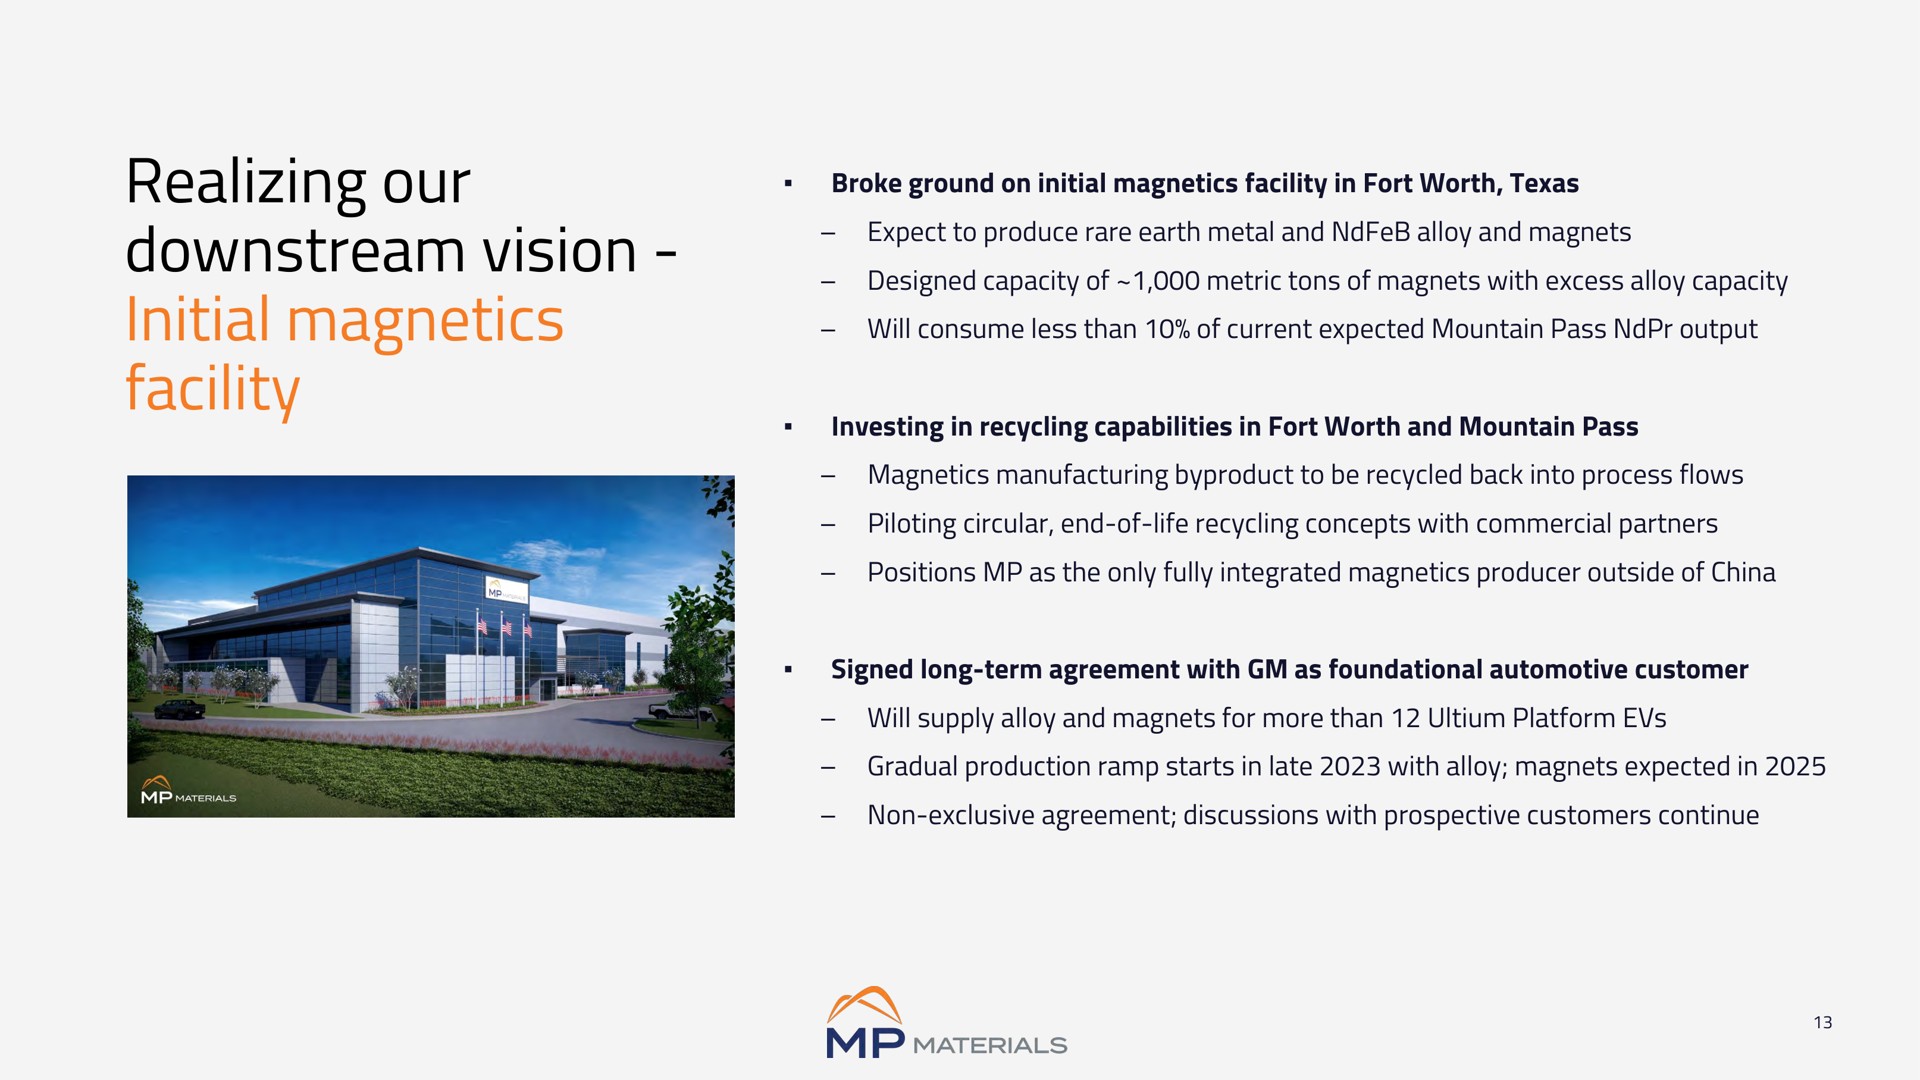 realizing our downstream vision initial magnetics facility | MP Materials